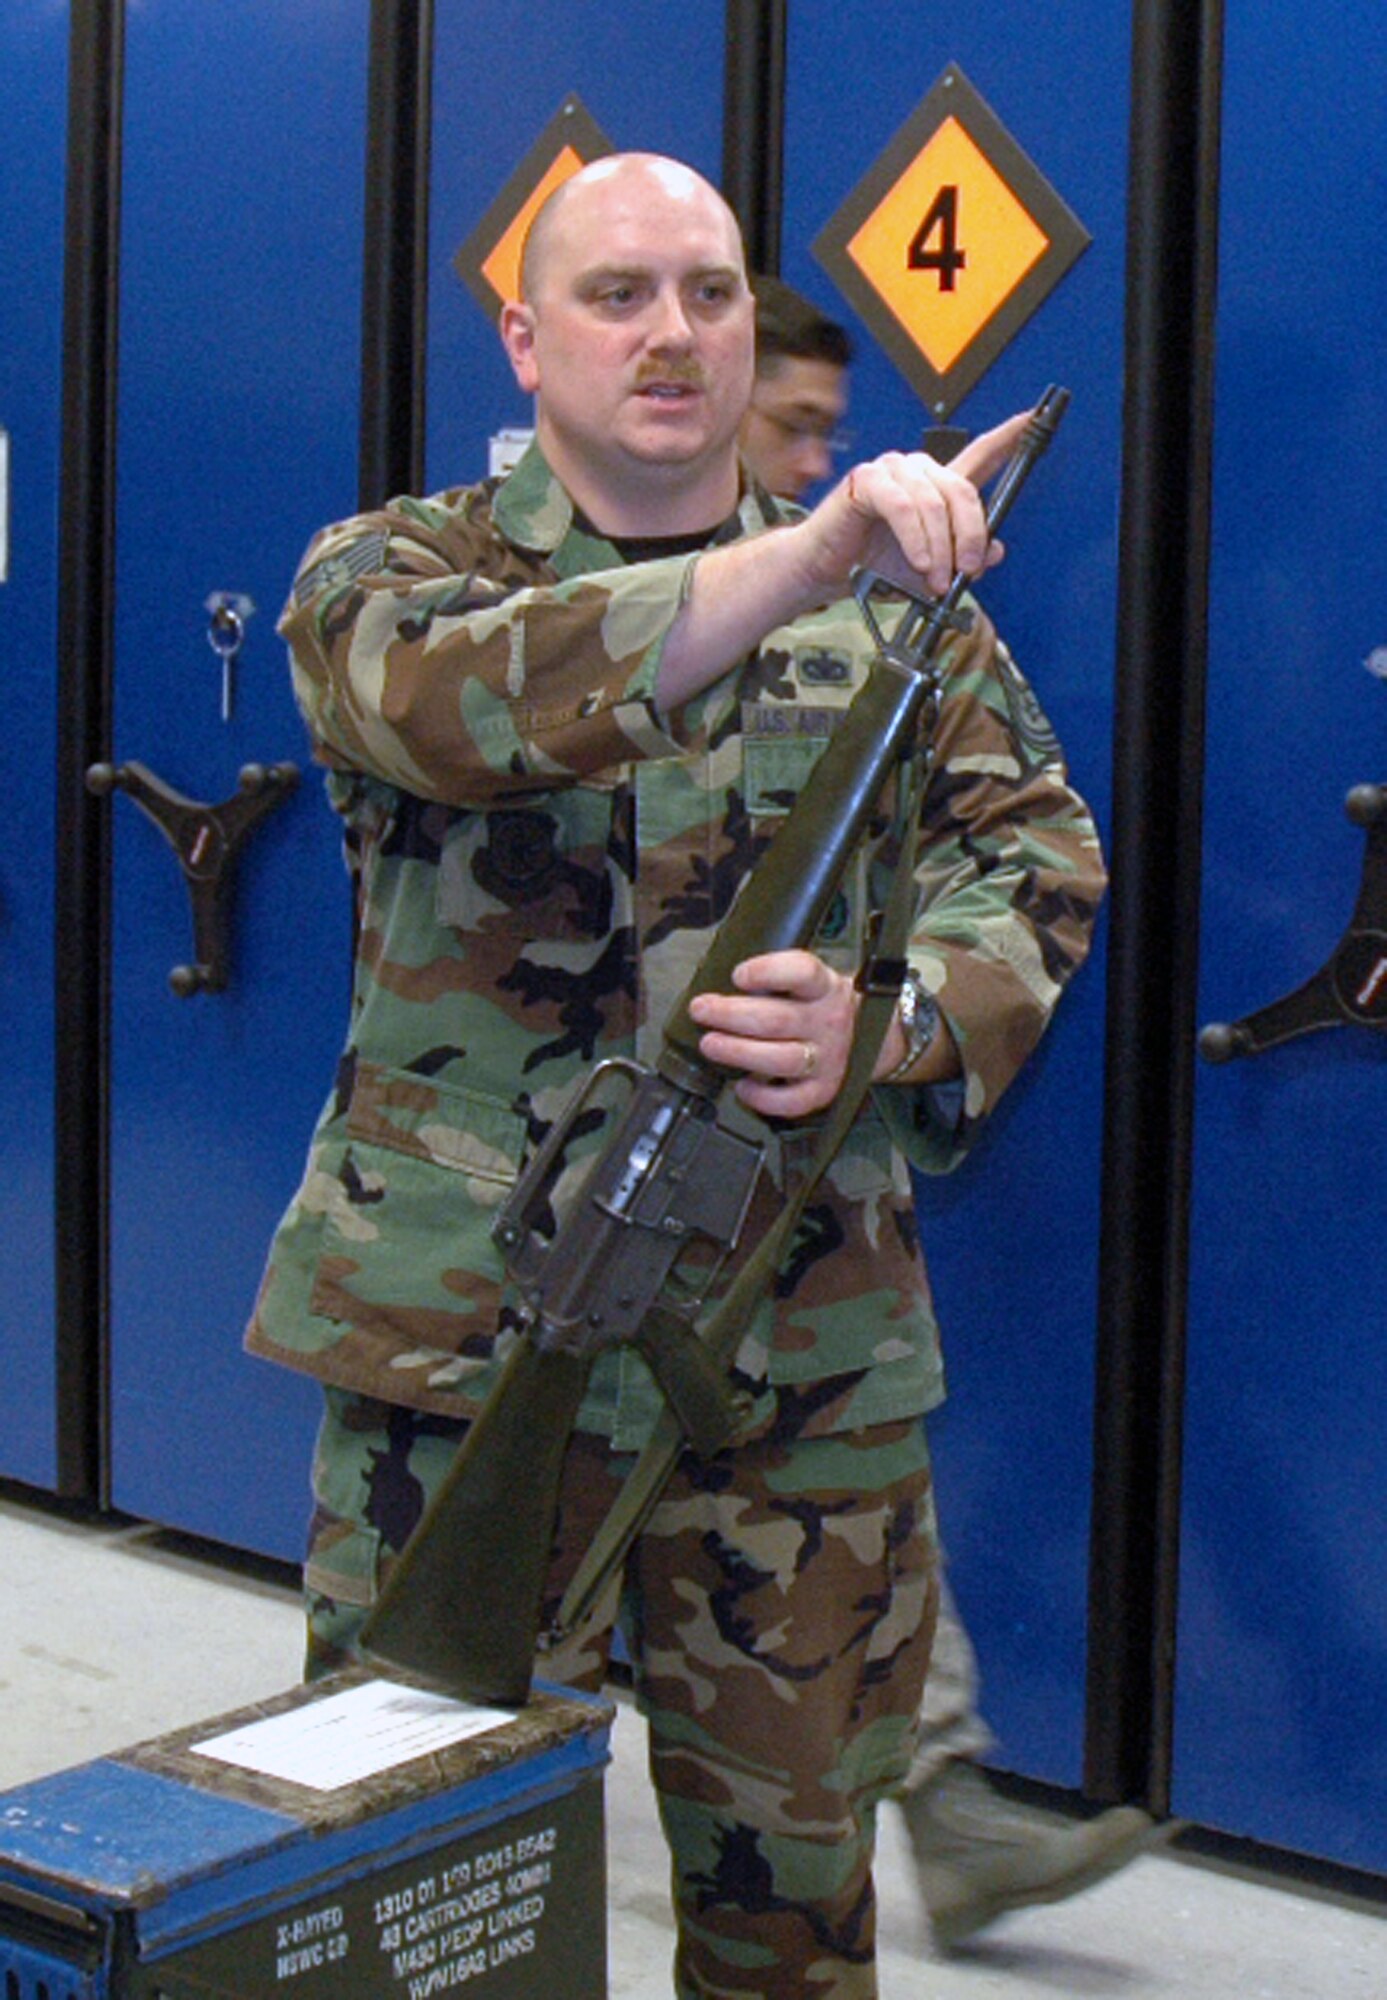 Tech. Sgt. Sean Heraty, U.S. Air Force Expeditionary Center armory, works on an M-16 inside the armory June 19, 2008, on Fort Dix, N.J.  The USAF EC's armory is one of the largest in the Air Force and holds the Air Force's largest inventory of foreign weapons on the U.S.' East Coast.  Largely, the Center's weapons are used for training in numerous expeditionary field courses.  (U.S. Air Force Photo/Tech. Sgt. Scott T. Sturkol)